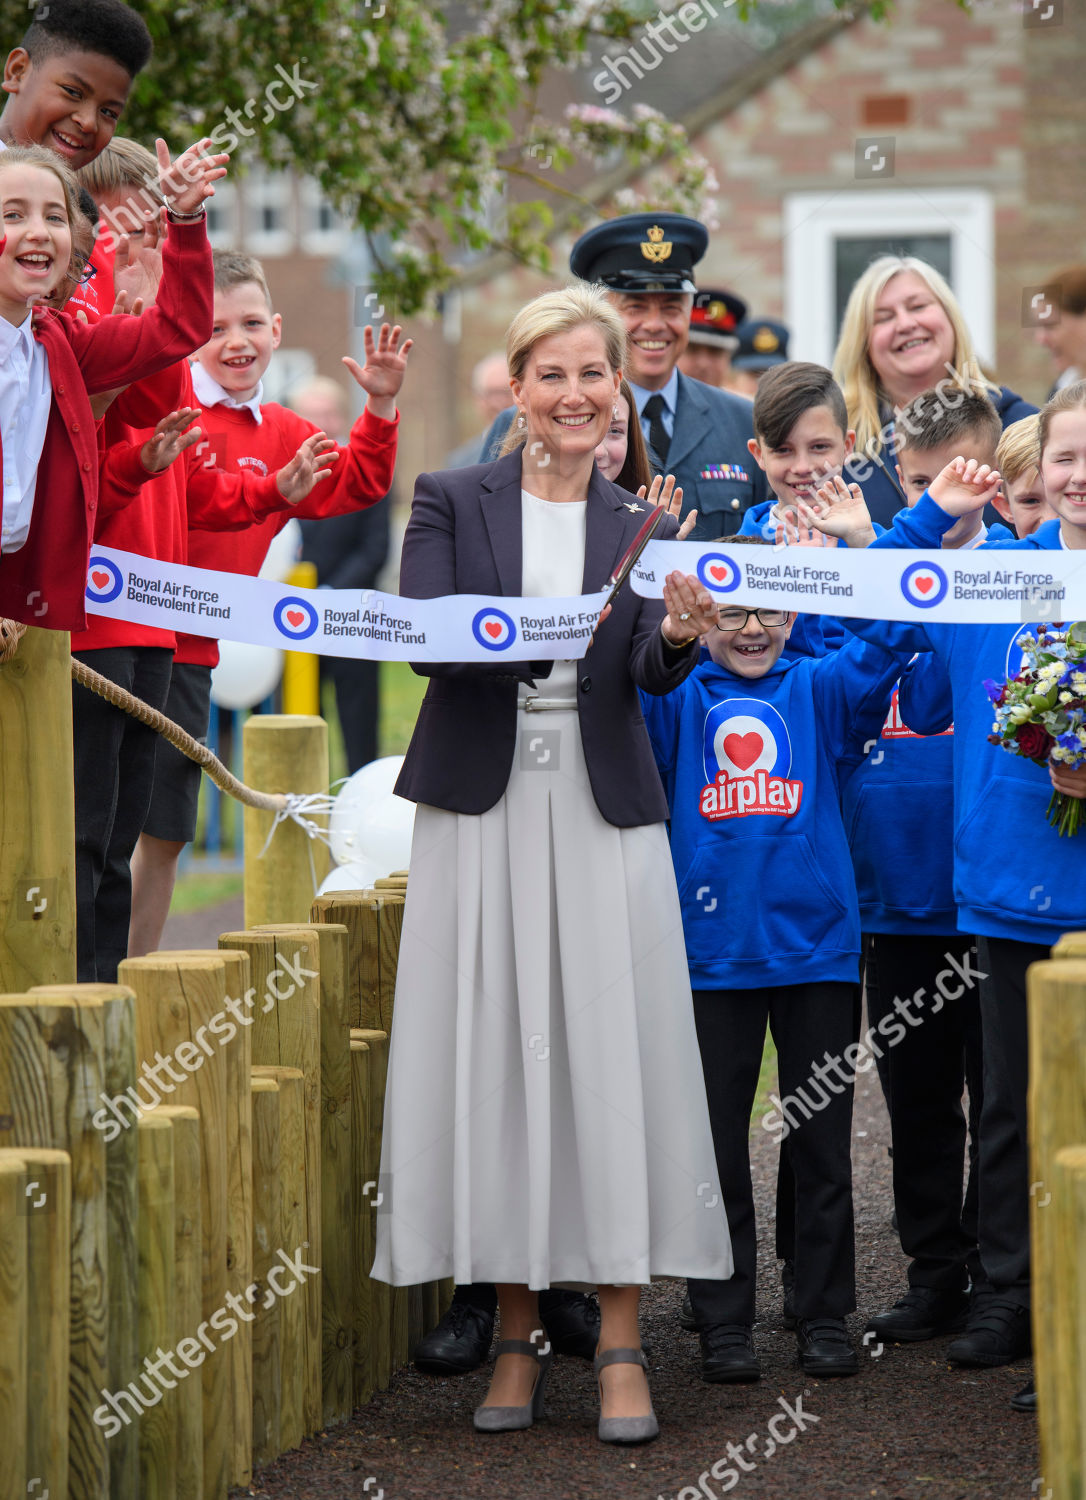 sophie-countess-of-wessex-opens-airplay-play-park-wittering-village-peterborough-uk-shutterstock-editorial-10217568x.jpg